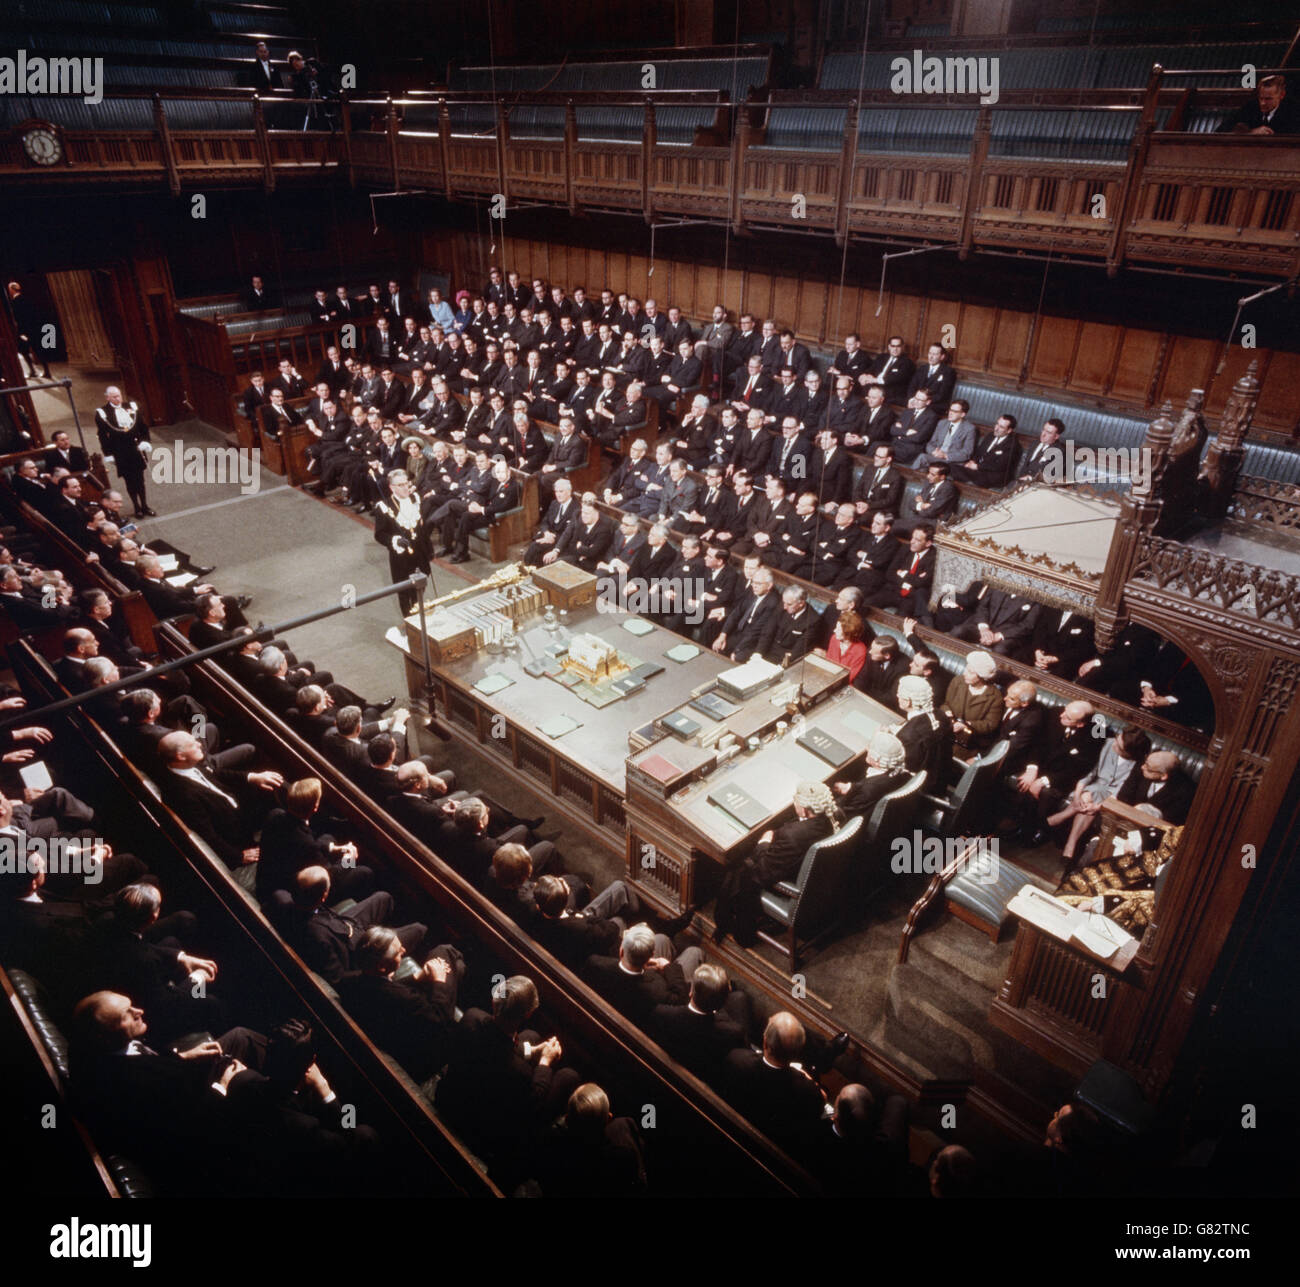 Government front-benchers are seen waiting awaiting the summons to the House of Lords for the State Opening Ceremony. (l-r) Edward Short, Roy Jenkins, Arthur Bottomley, George Brown, Harold Wilson, James Callaghan, Denis Healey, William Ross, Frank Cousins, and Fred Peart. It was the first time that TV and Press cameras were allowed into the House of Commons. Stock Photo